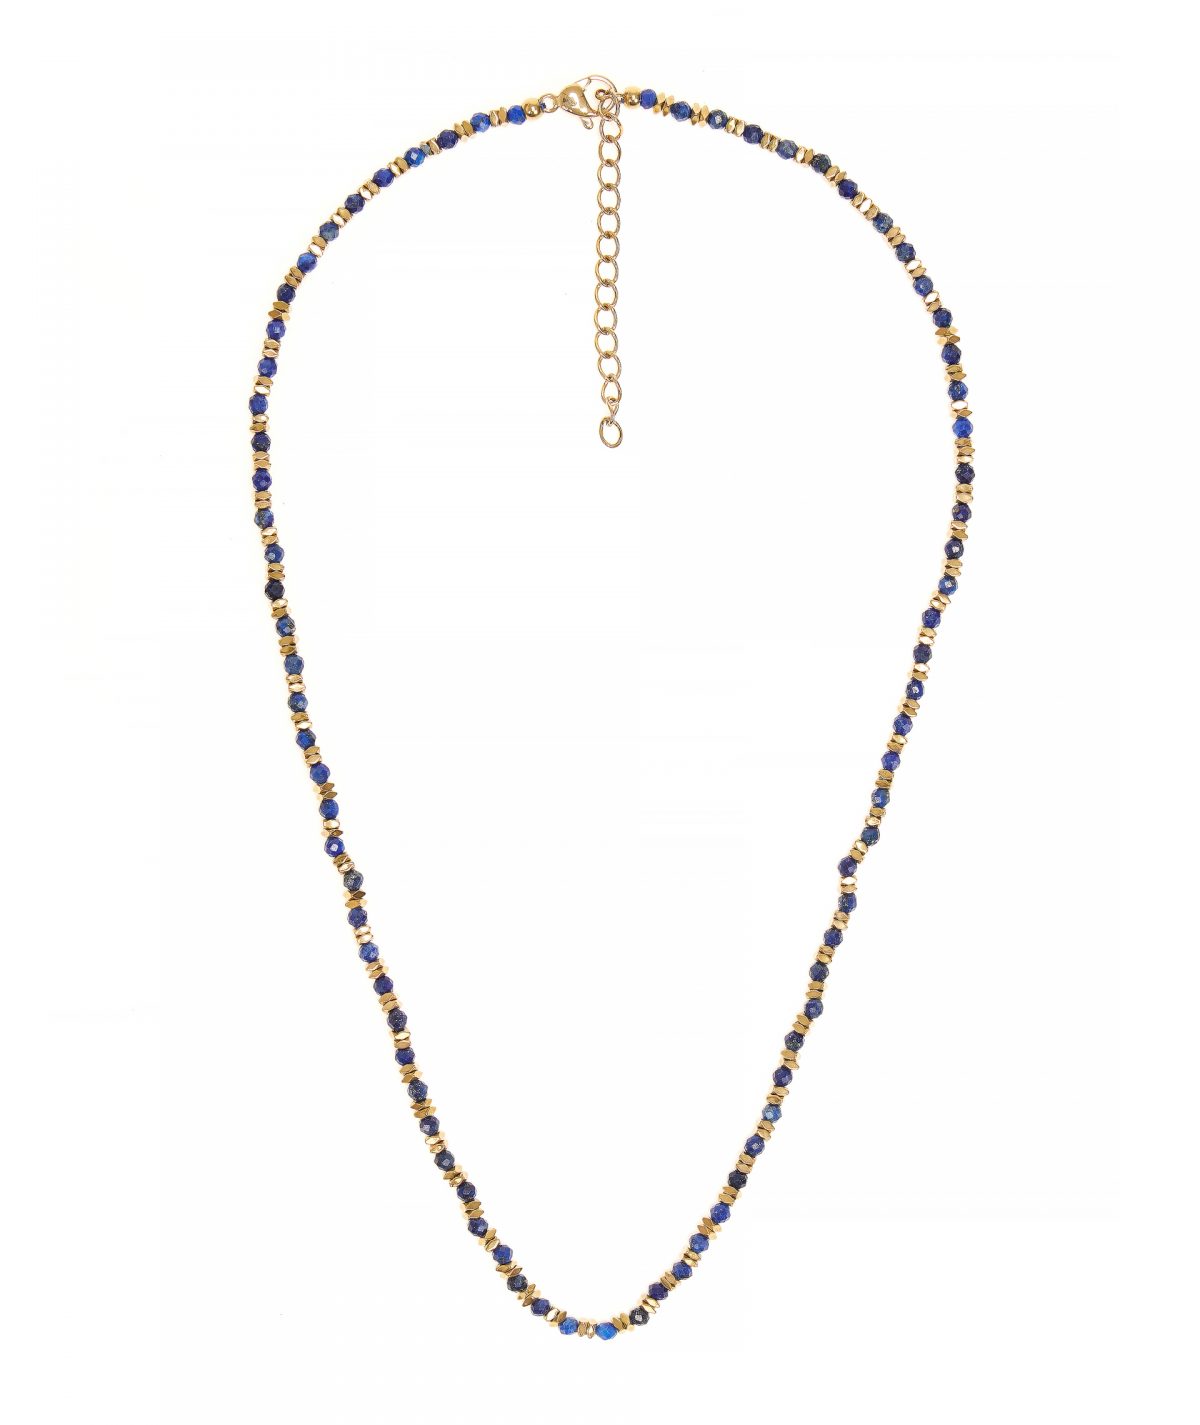 Blue Stones and Gold Squares Necklace by TFD